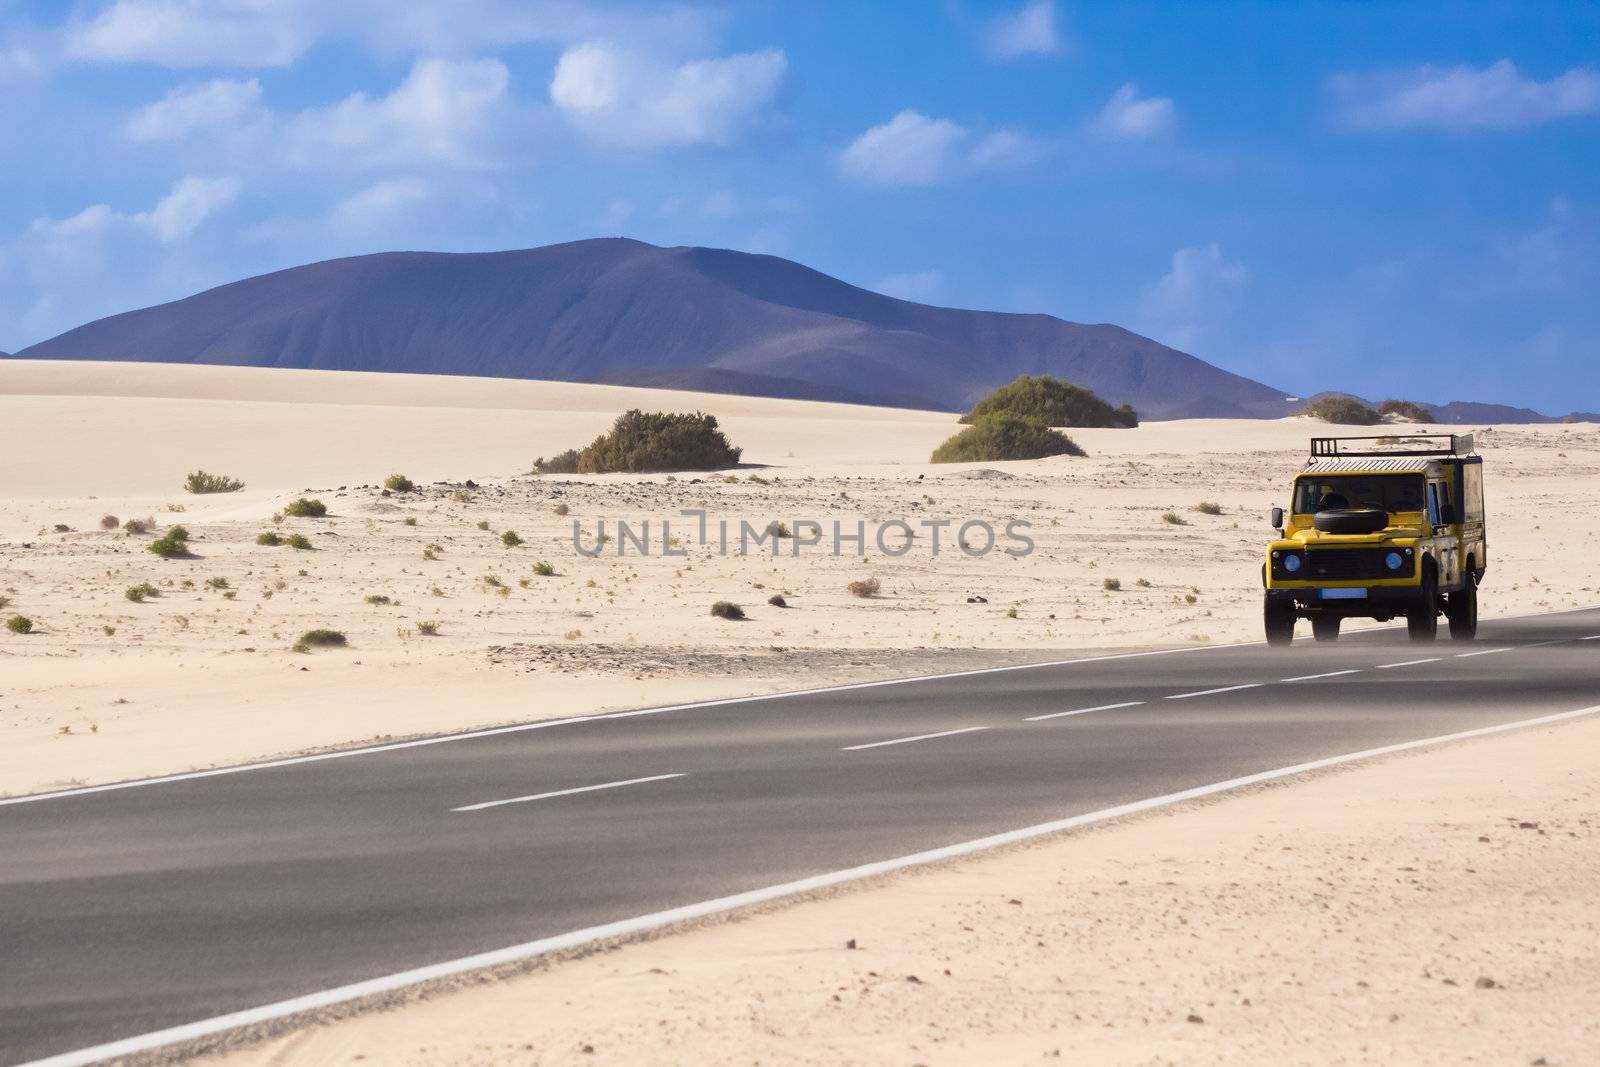 Jeep on the road crossing the desert.